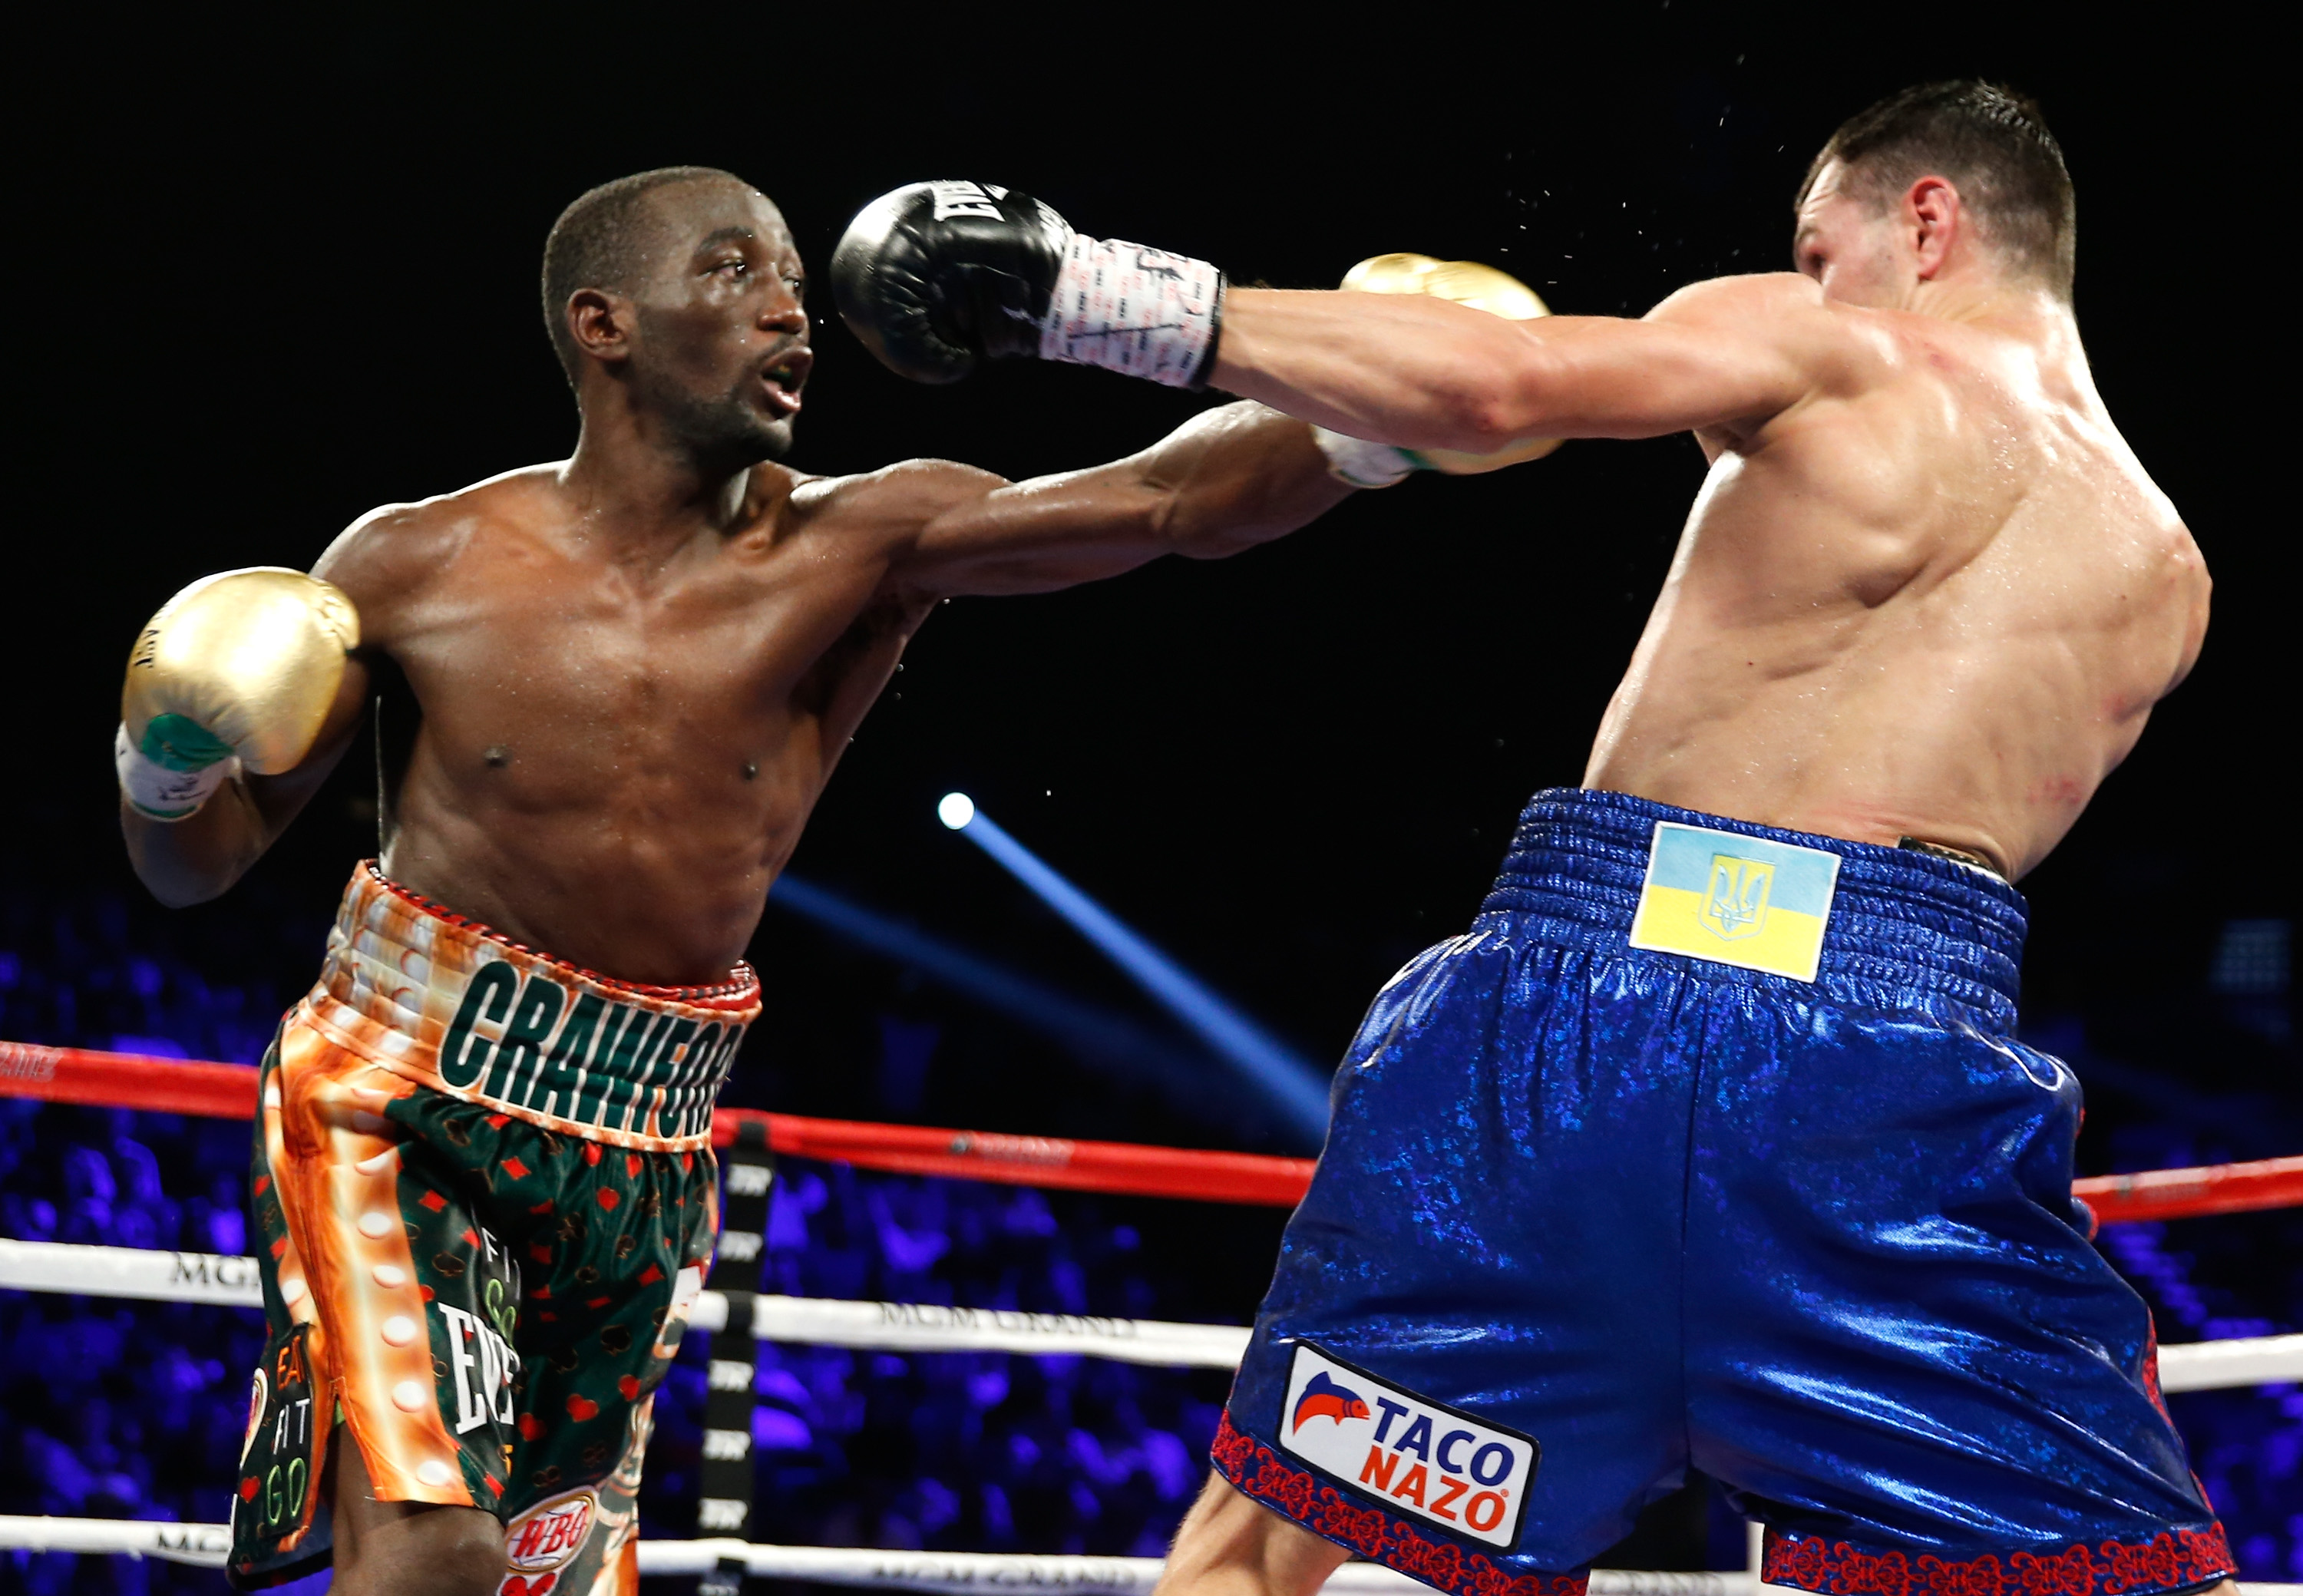 Boxing Superlightweight champ Crawford looks to end year on a high